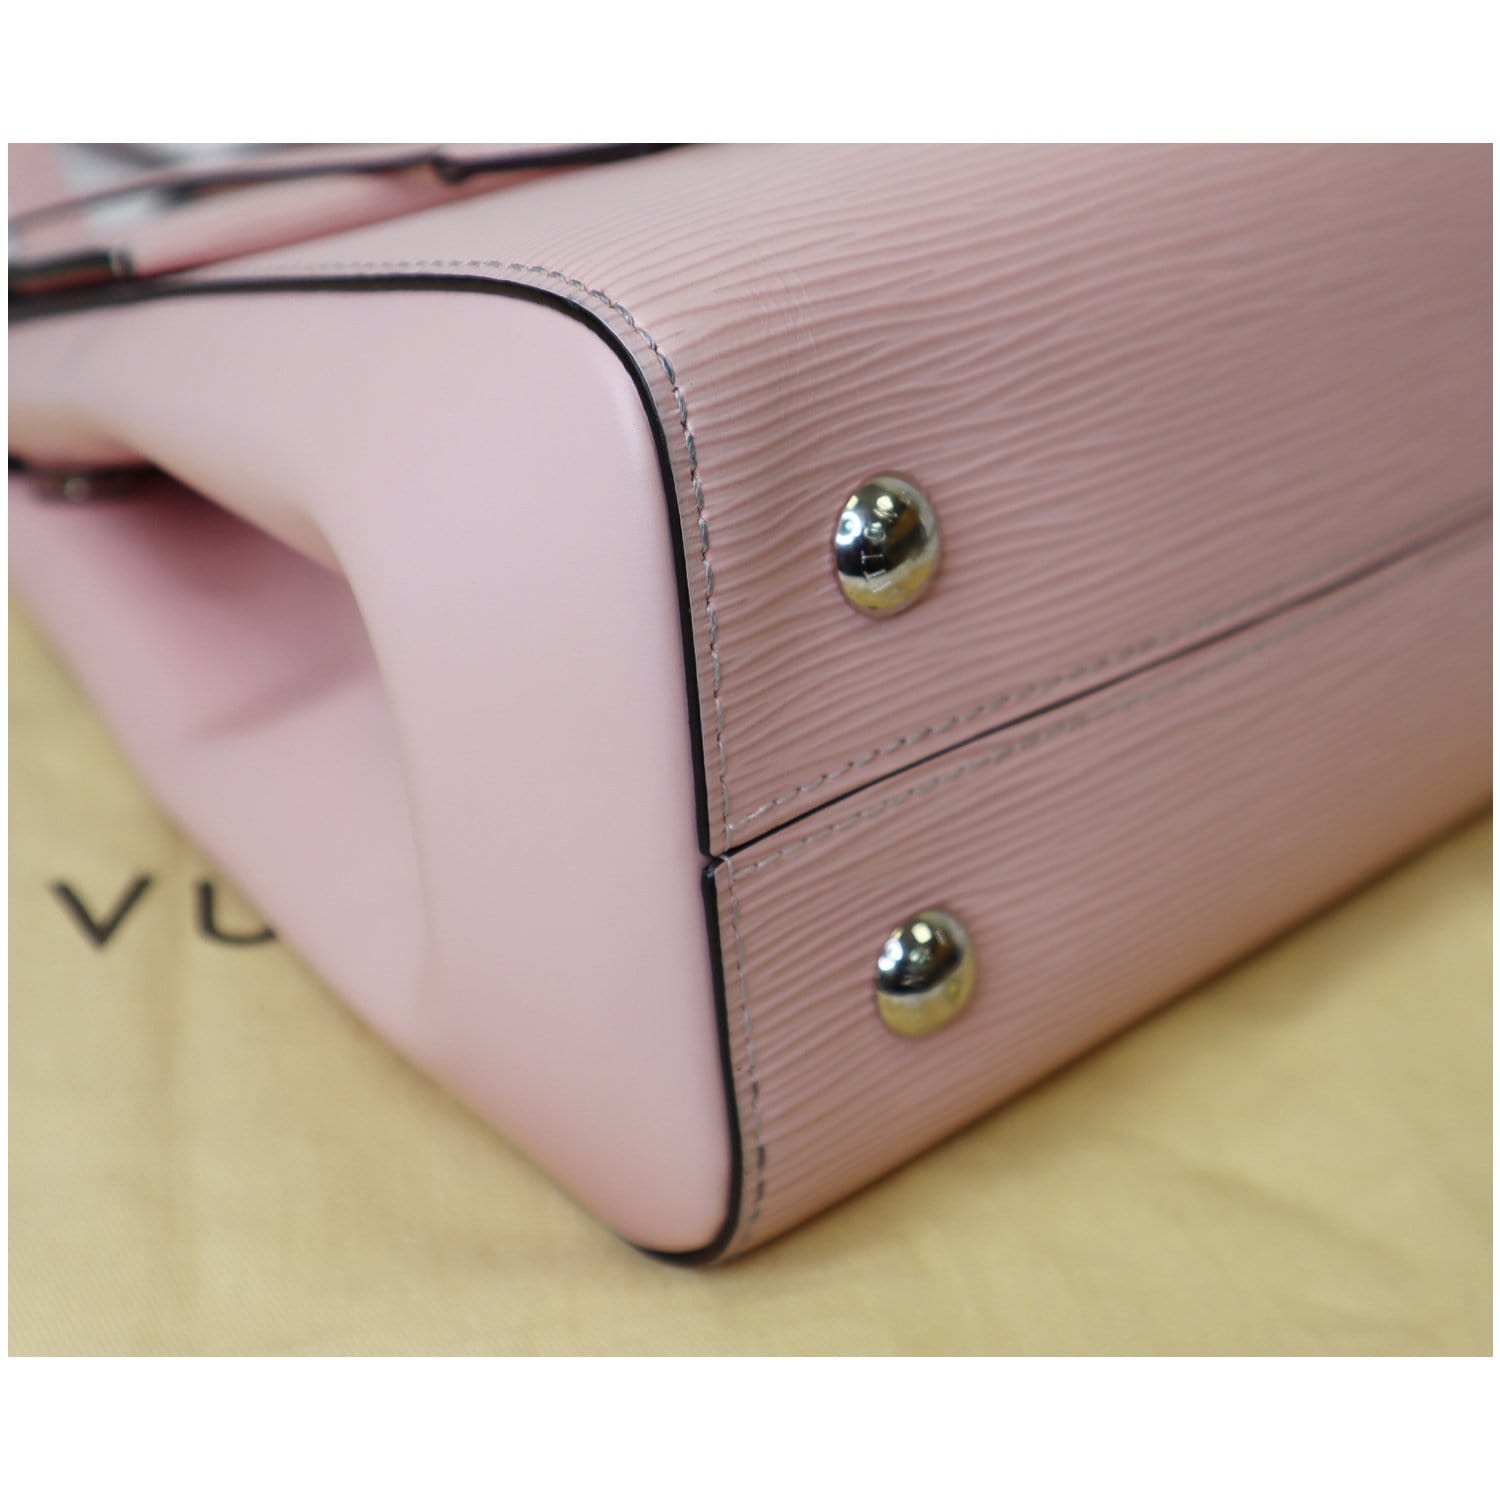 Cluny leather handbag Louis Vuitton Pink in Leather - 35565012